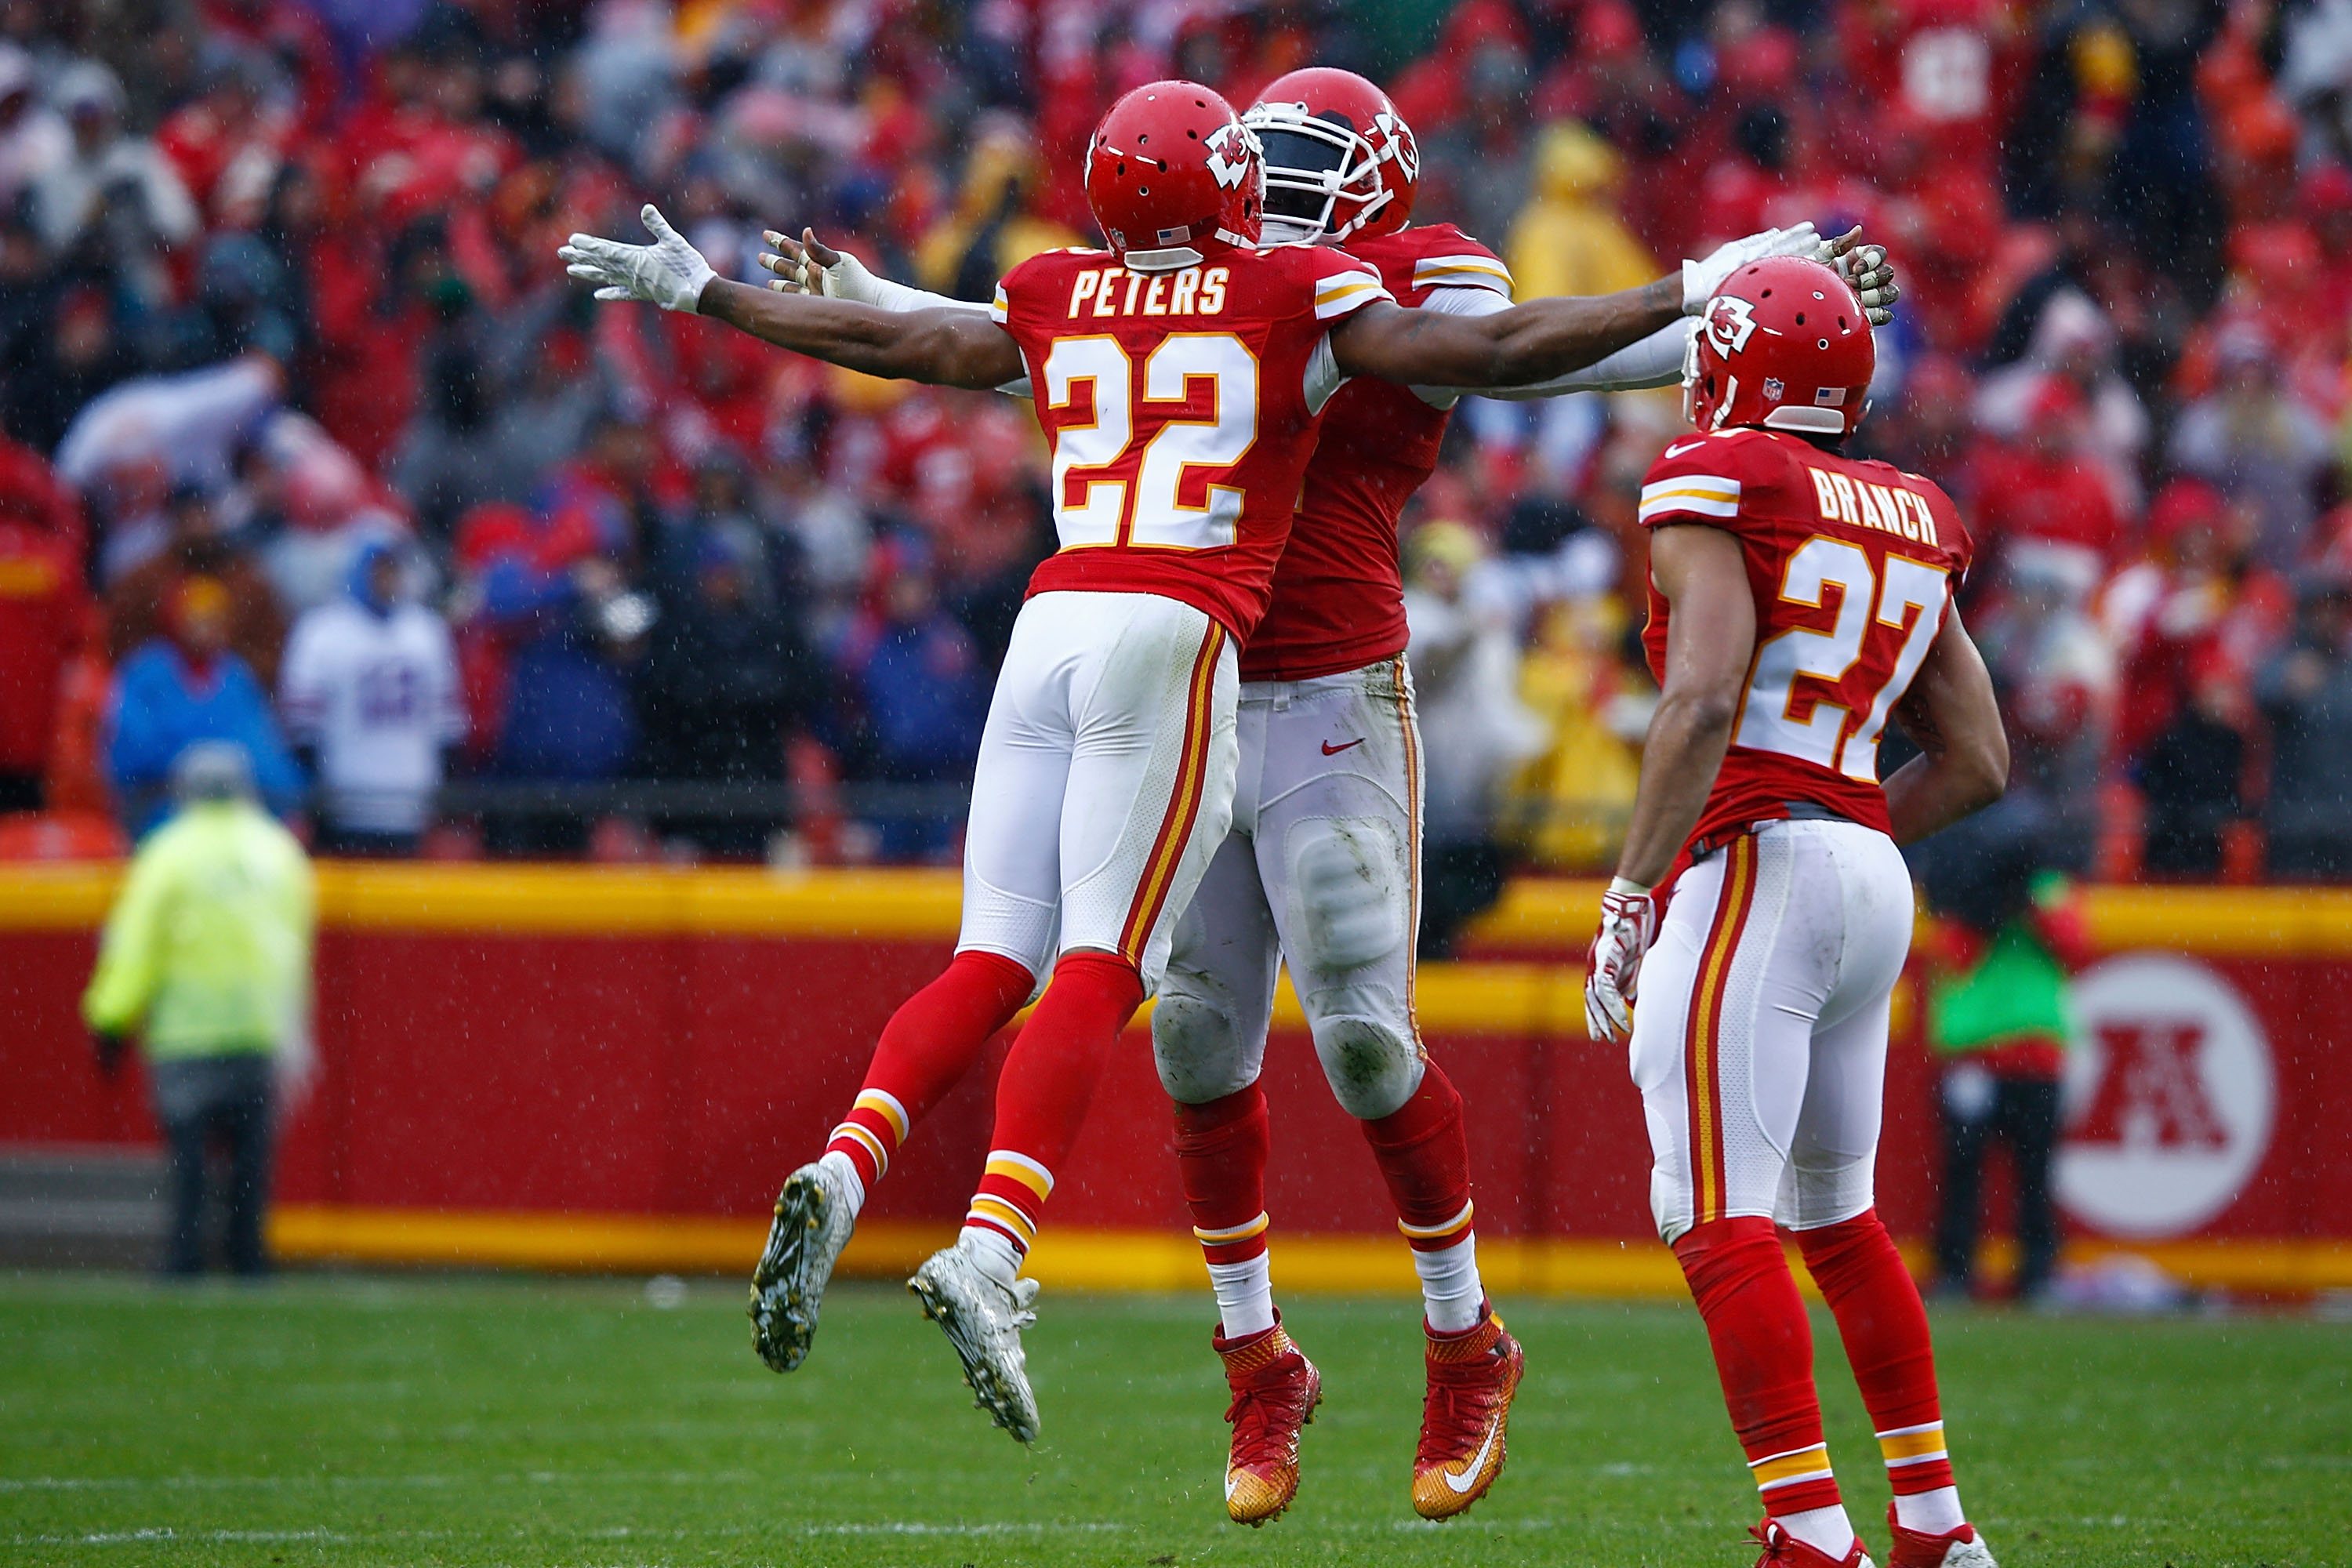 Raiders vs. Chiefs Live Stream How to Watch Online